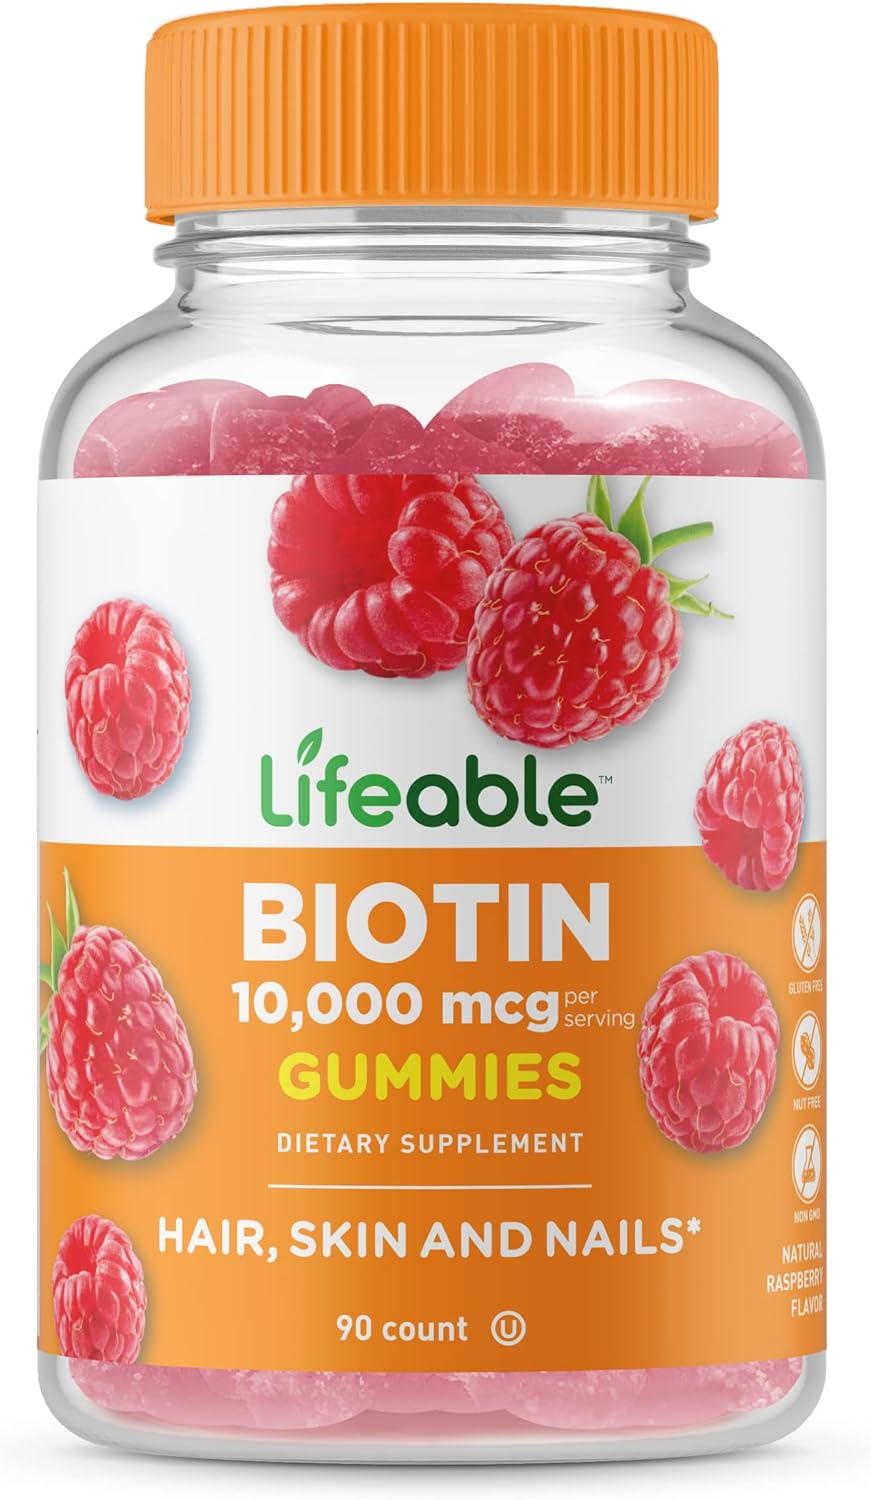 Lifeable Biotin Gummies 10,000mcg - Great Tasting Natural Flavor Supplement Vitamins - Vegetarian GMO-free Chewable - for Beautiful & Glamorous Hair and Nails Growth - for Men Women Teens - 90 Gummies